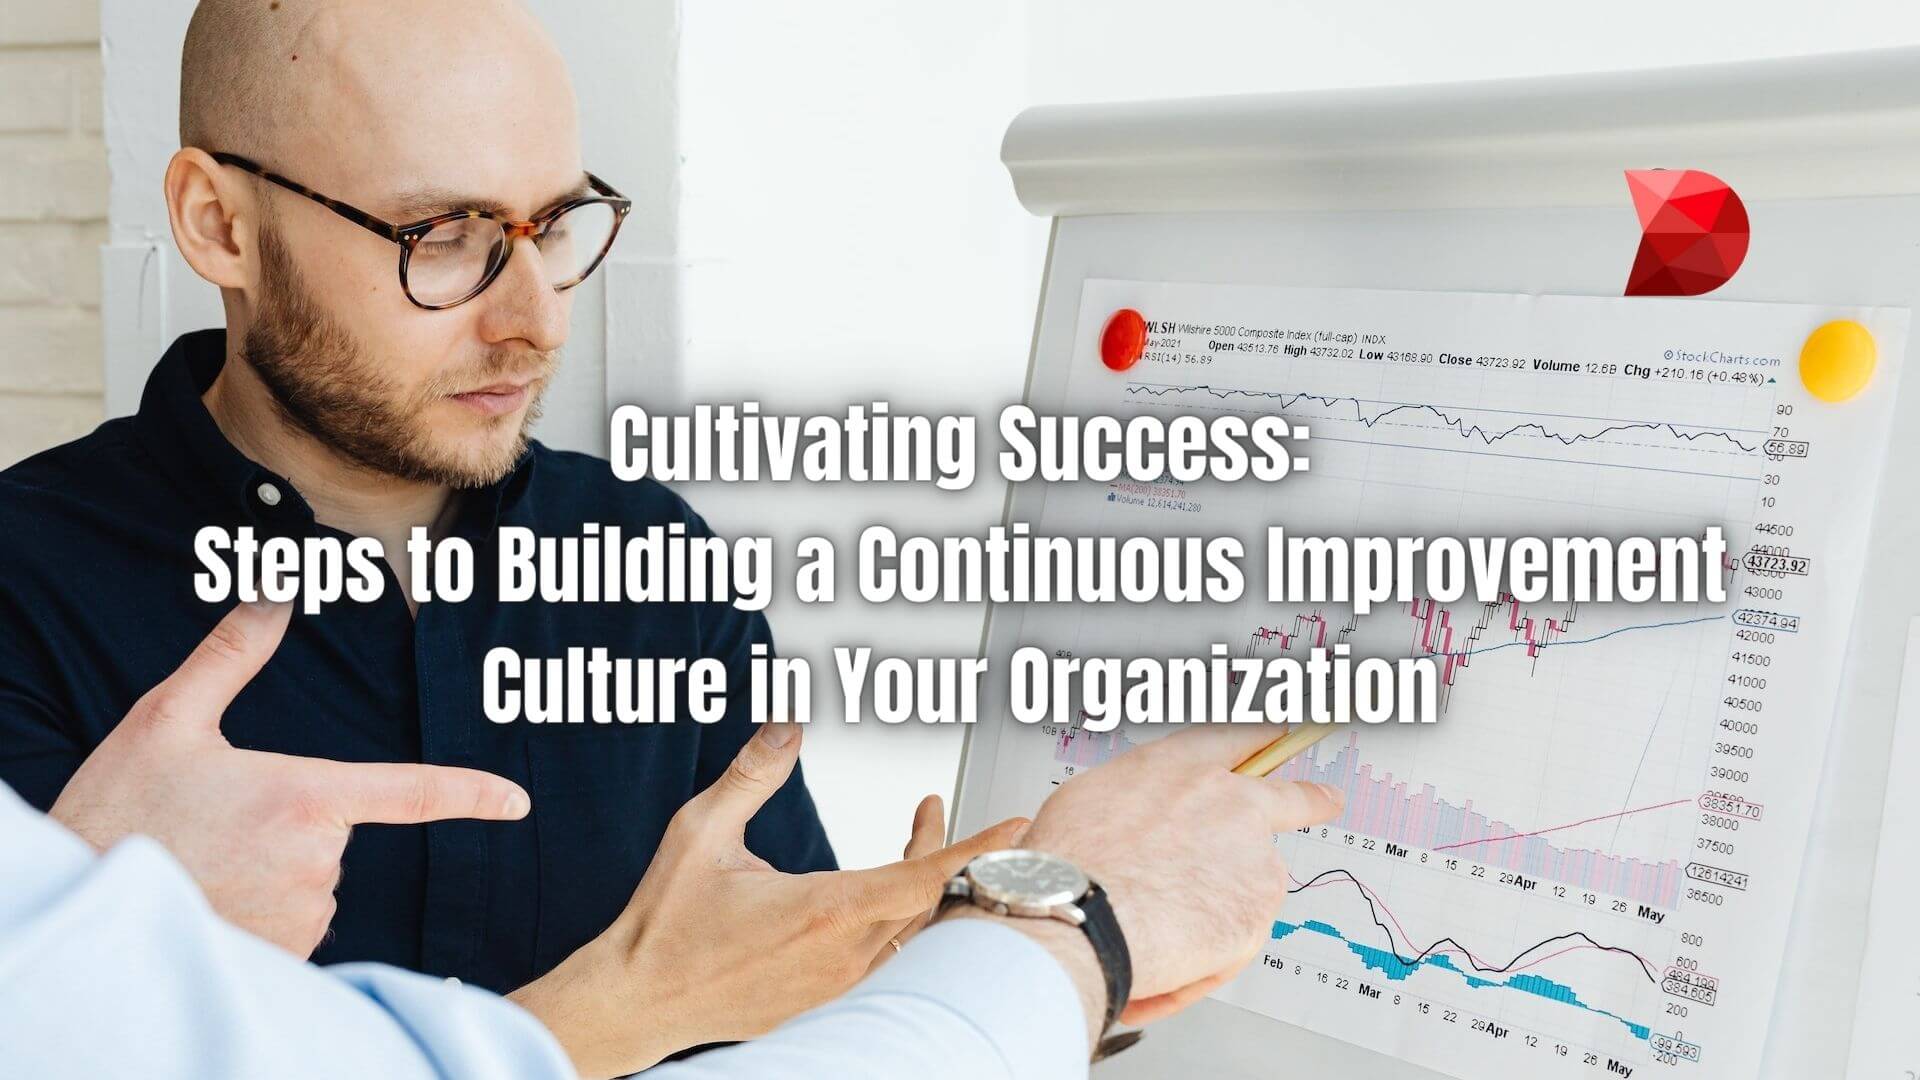 A continuous improvement culture is essential for any organization that wants to achieve success and remain competitive. Learn more!